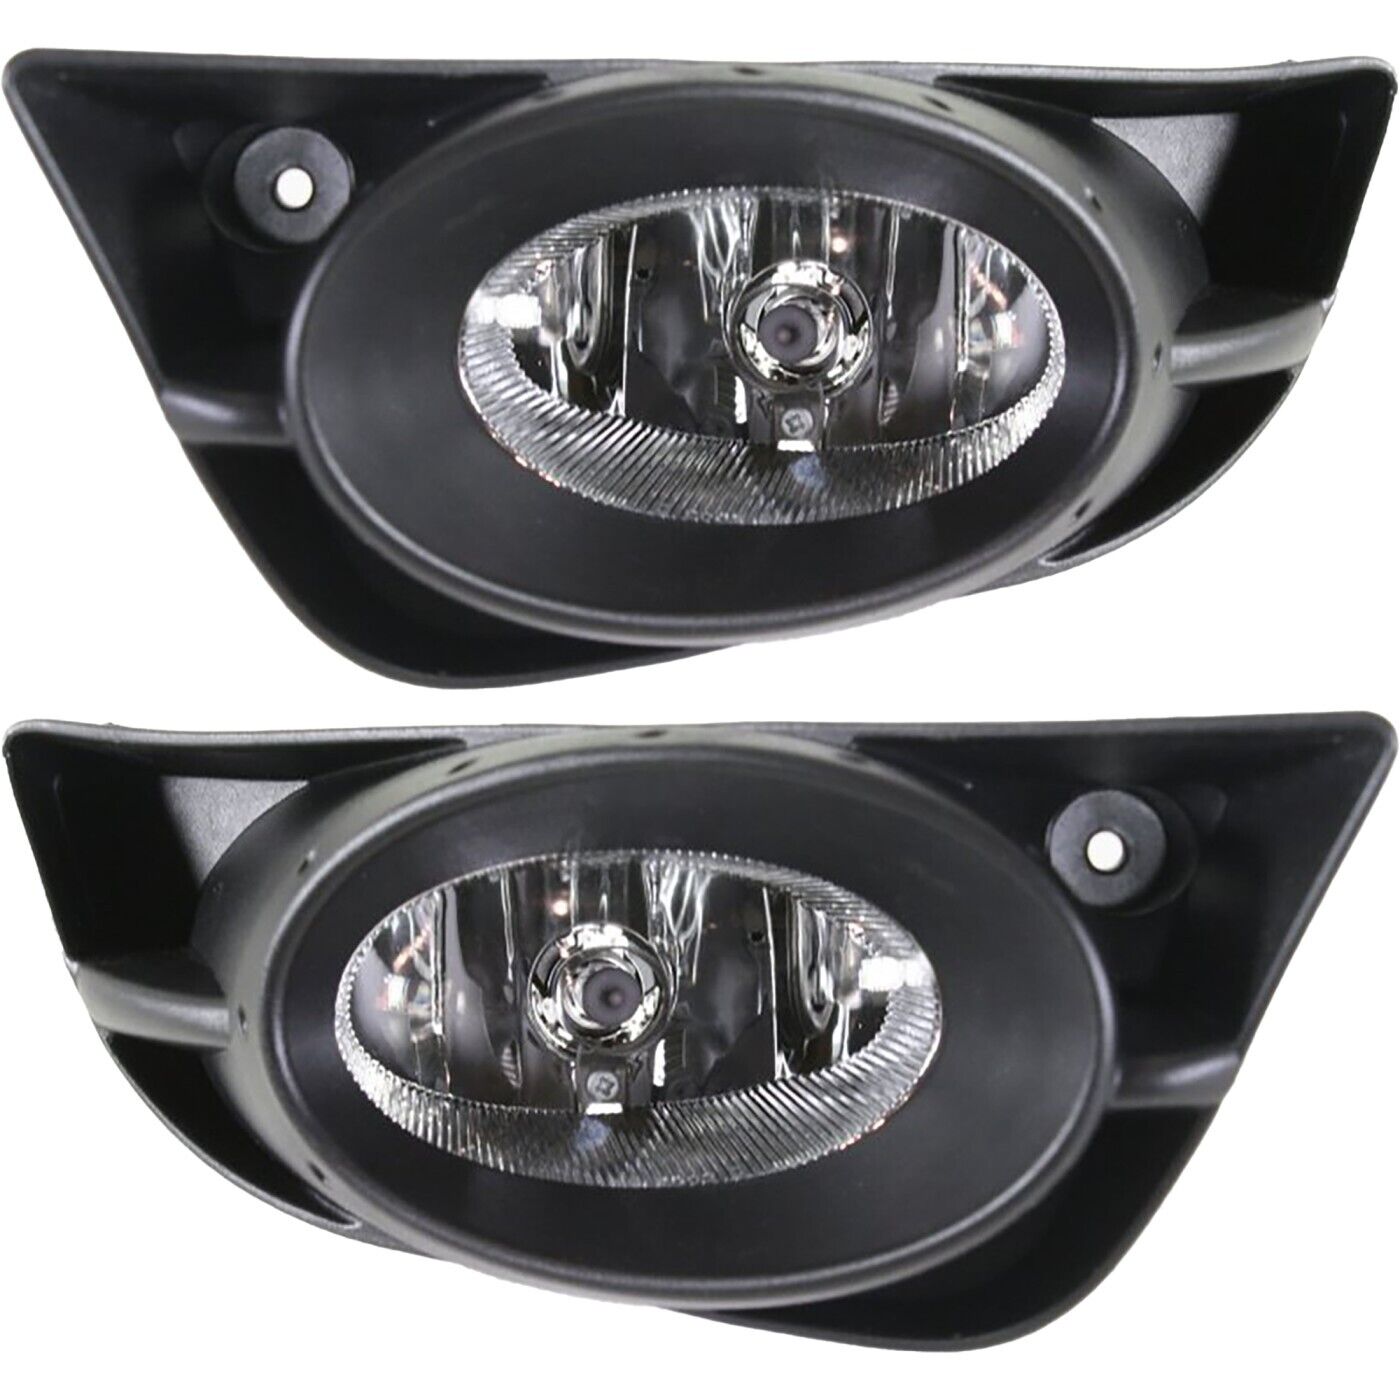 New Fog Lights Driving Lamps Set of 2 Driver & Passenger Side LH RH for Fit Pair